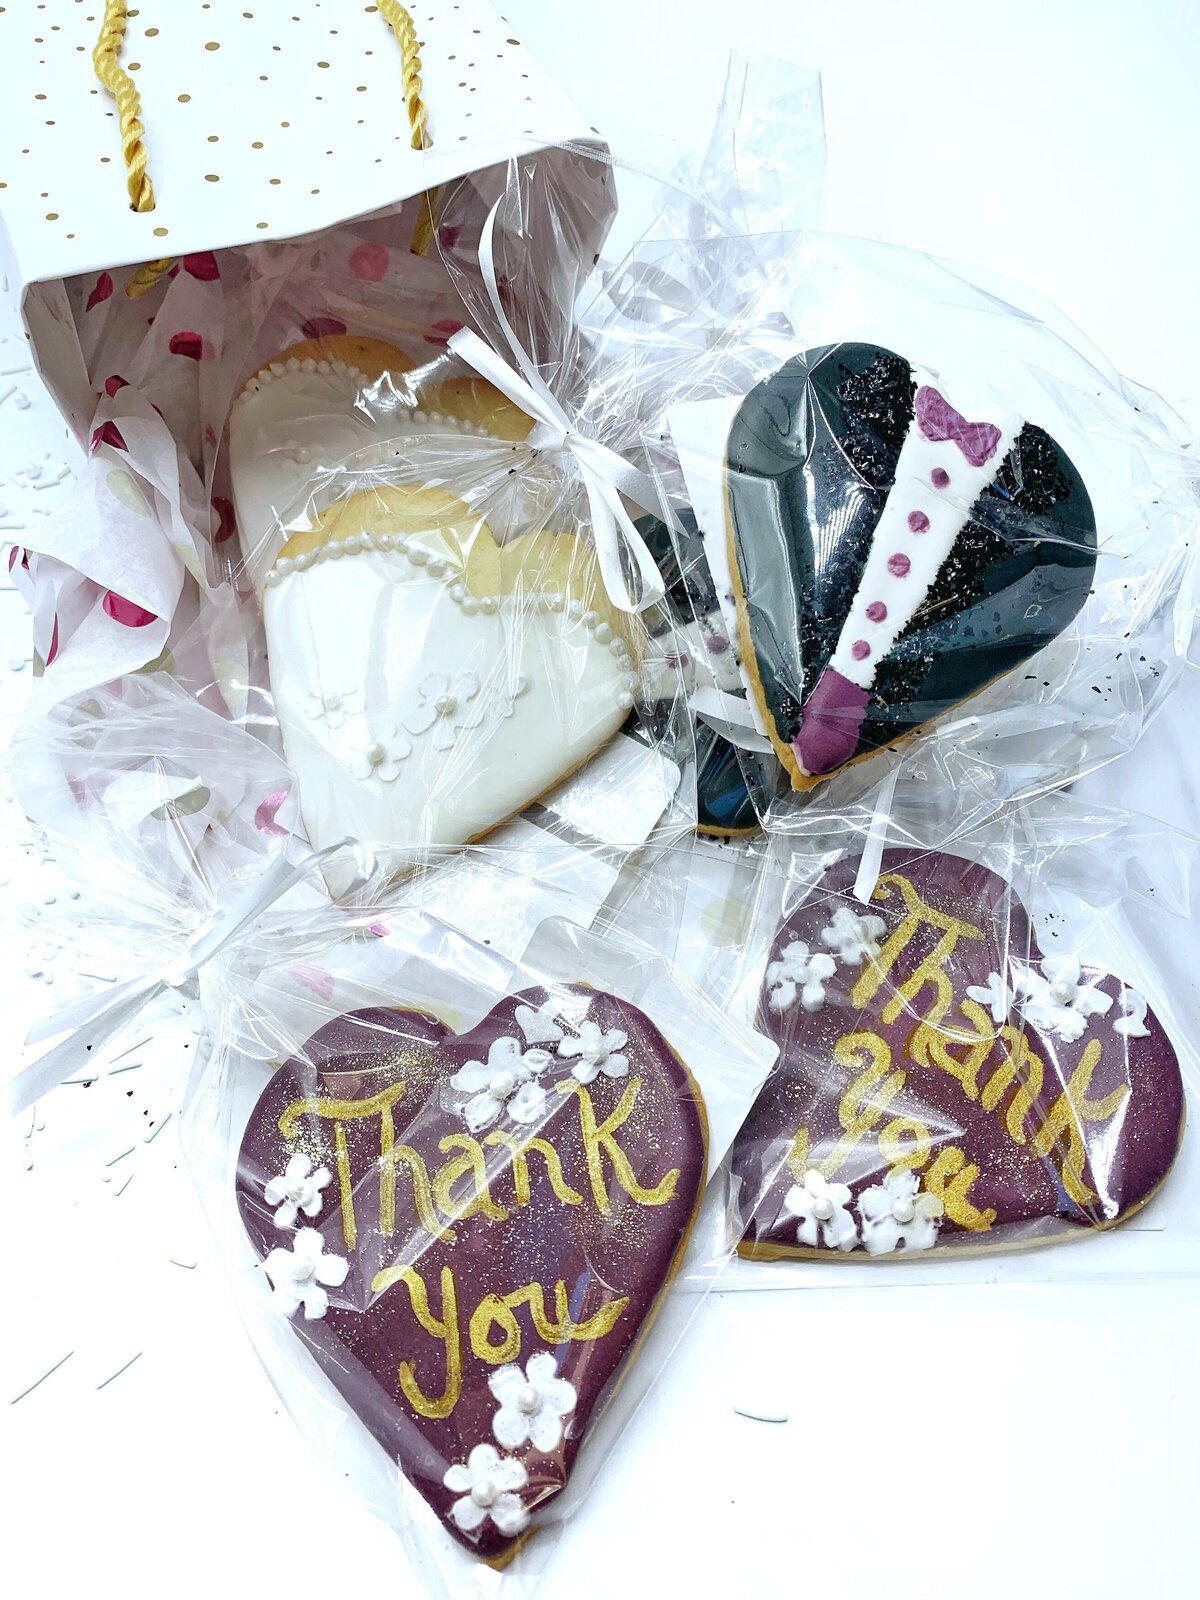 Heart shaped cookies with Thank You inscription and flowers and bride and groom decorated cookie wedding favors